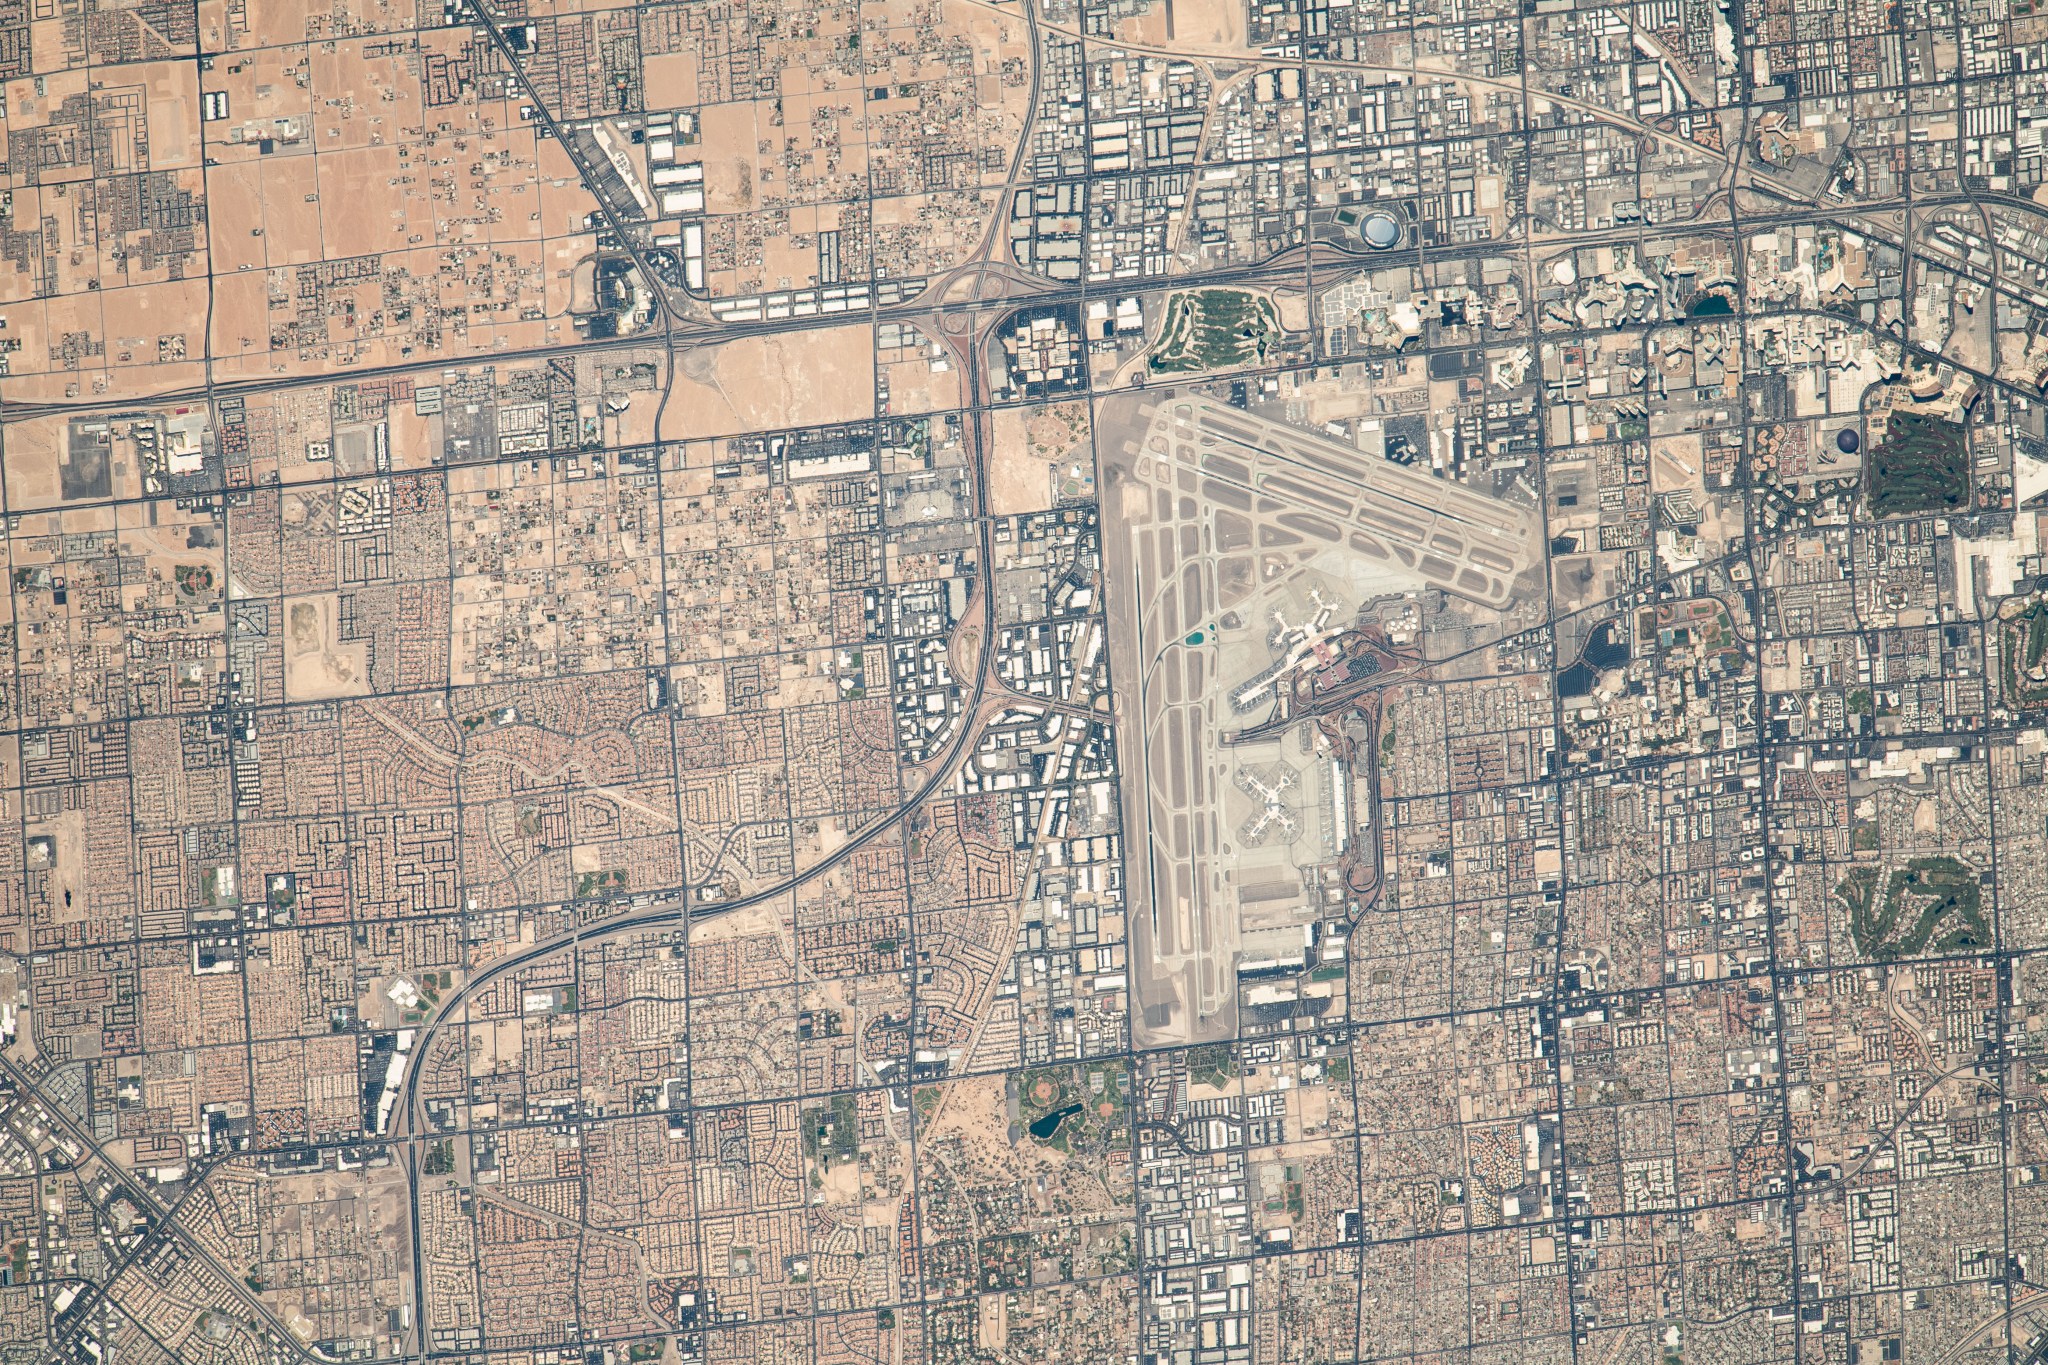 A view of Las Vegas from space. Harry Reid International Airport is visible slightly to the right of the center of the image, and Allegiant Stadium is visible just above the airport. The land is a variety of tans and greens, and there are many square city patterns surrounding the airport on all sides.